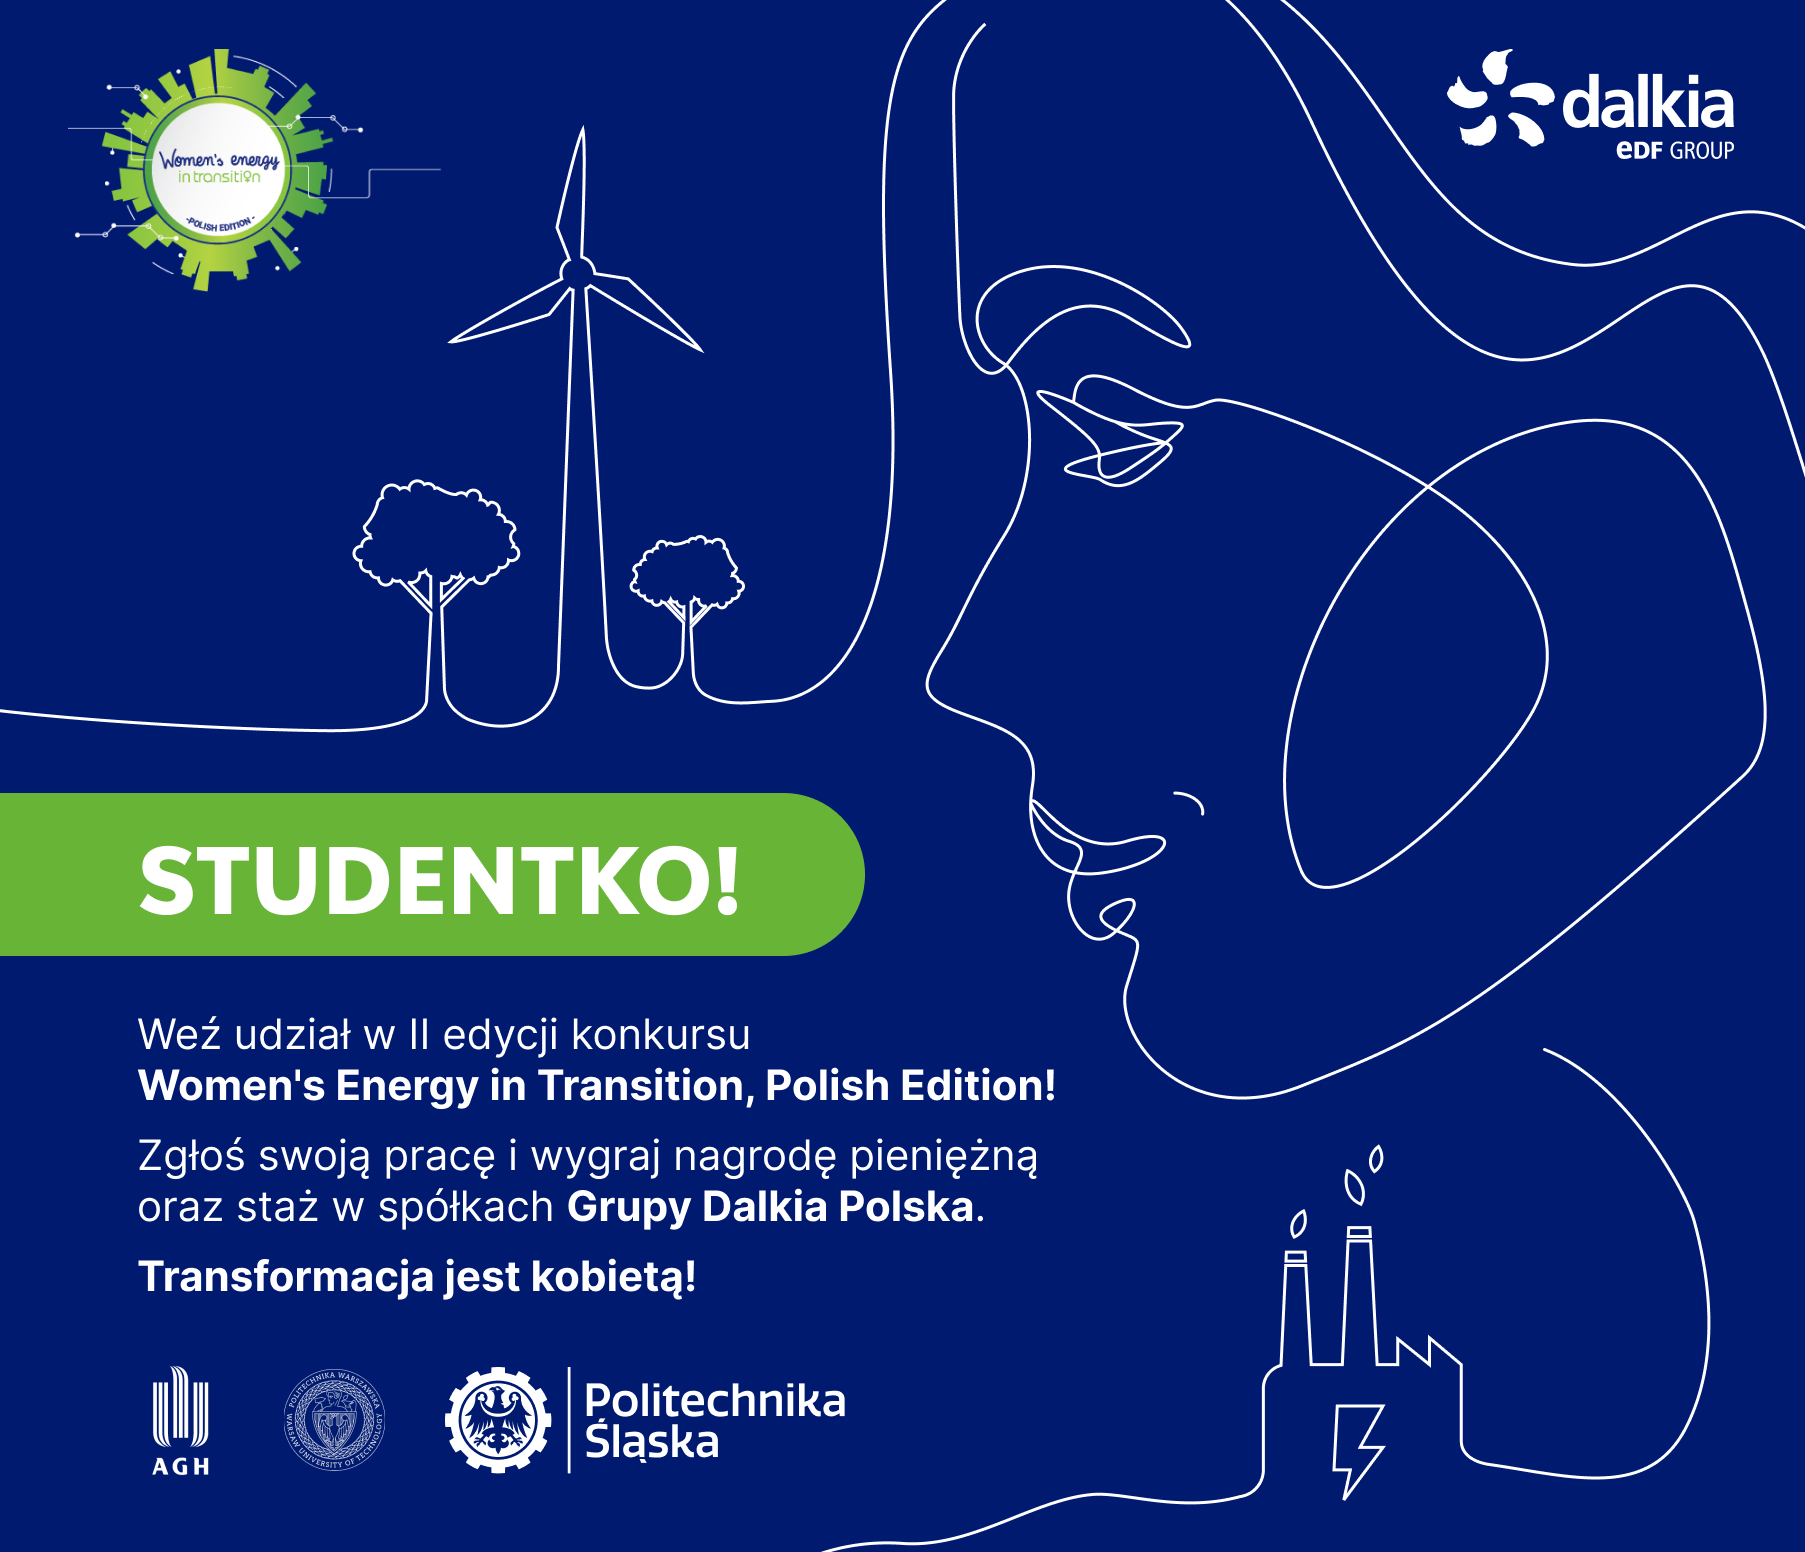 Women's Energy in Transition - Polish Edition 